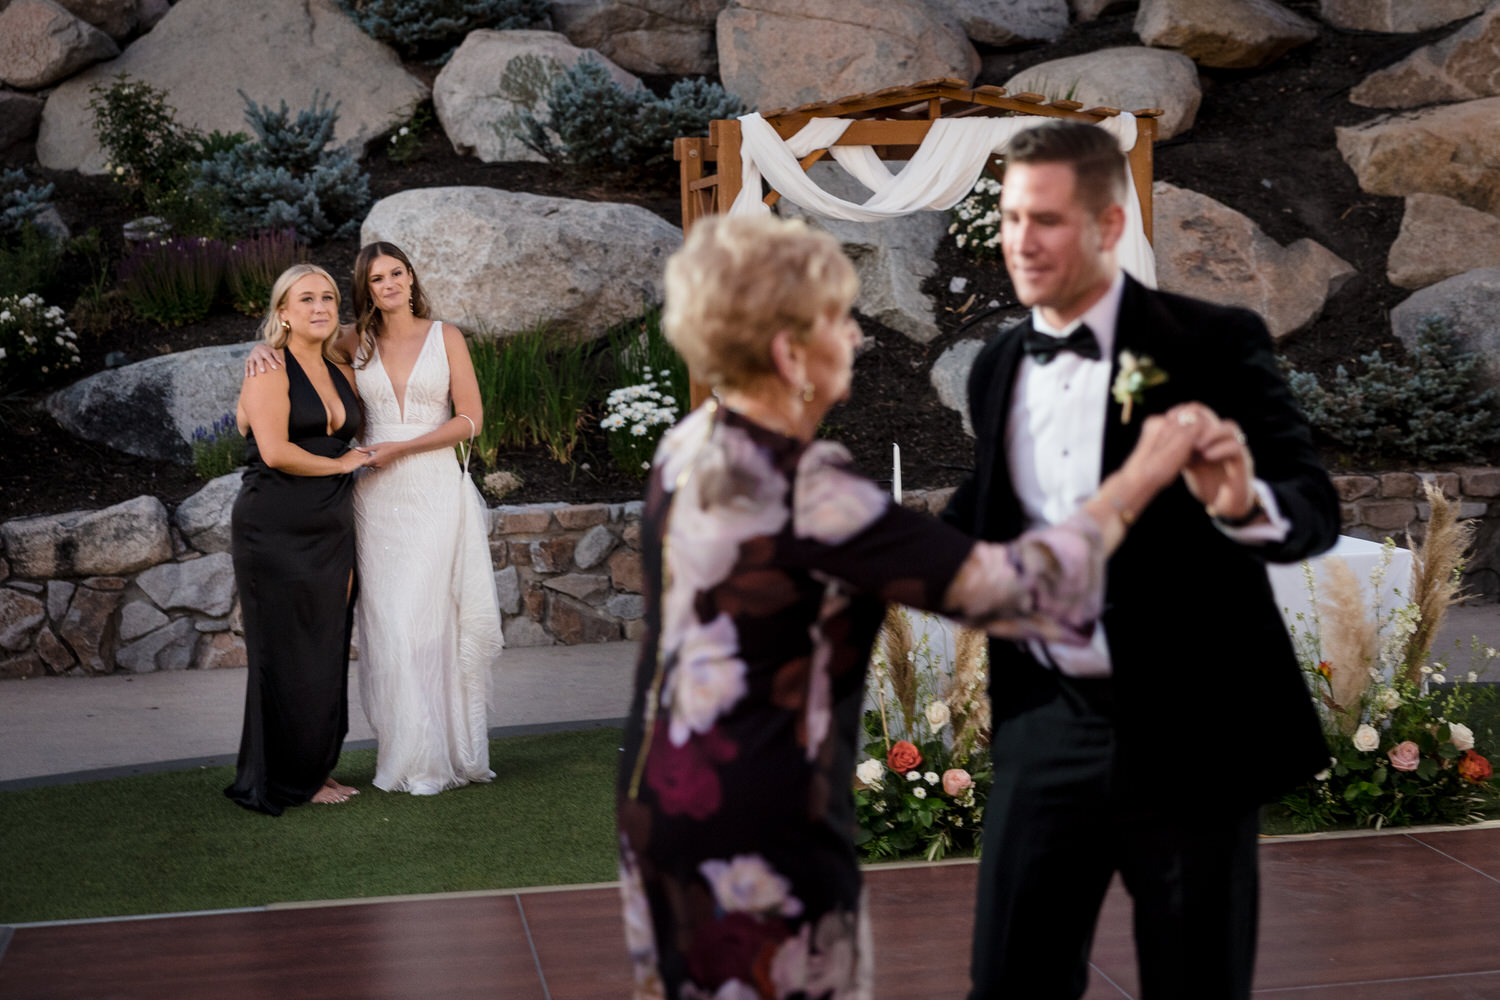 Bride and her maid of honor stand together while watching the groom dance with his mom.